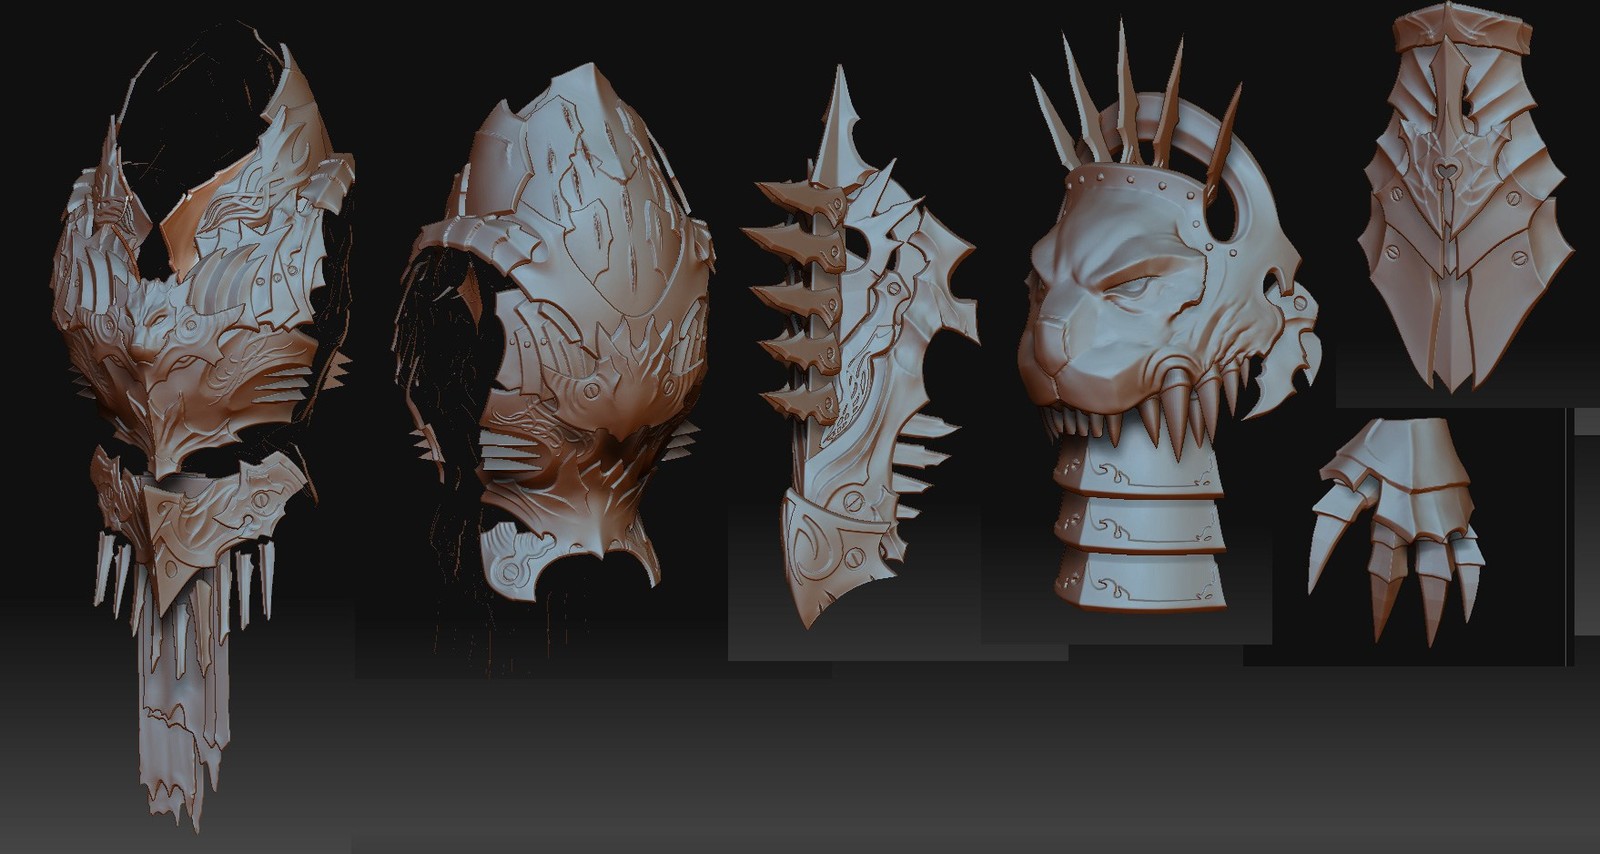 Zbrushing for them normal maps and ambient textures.